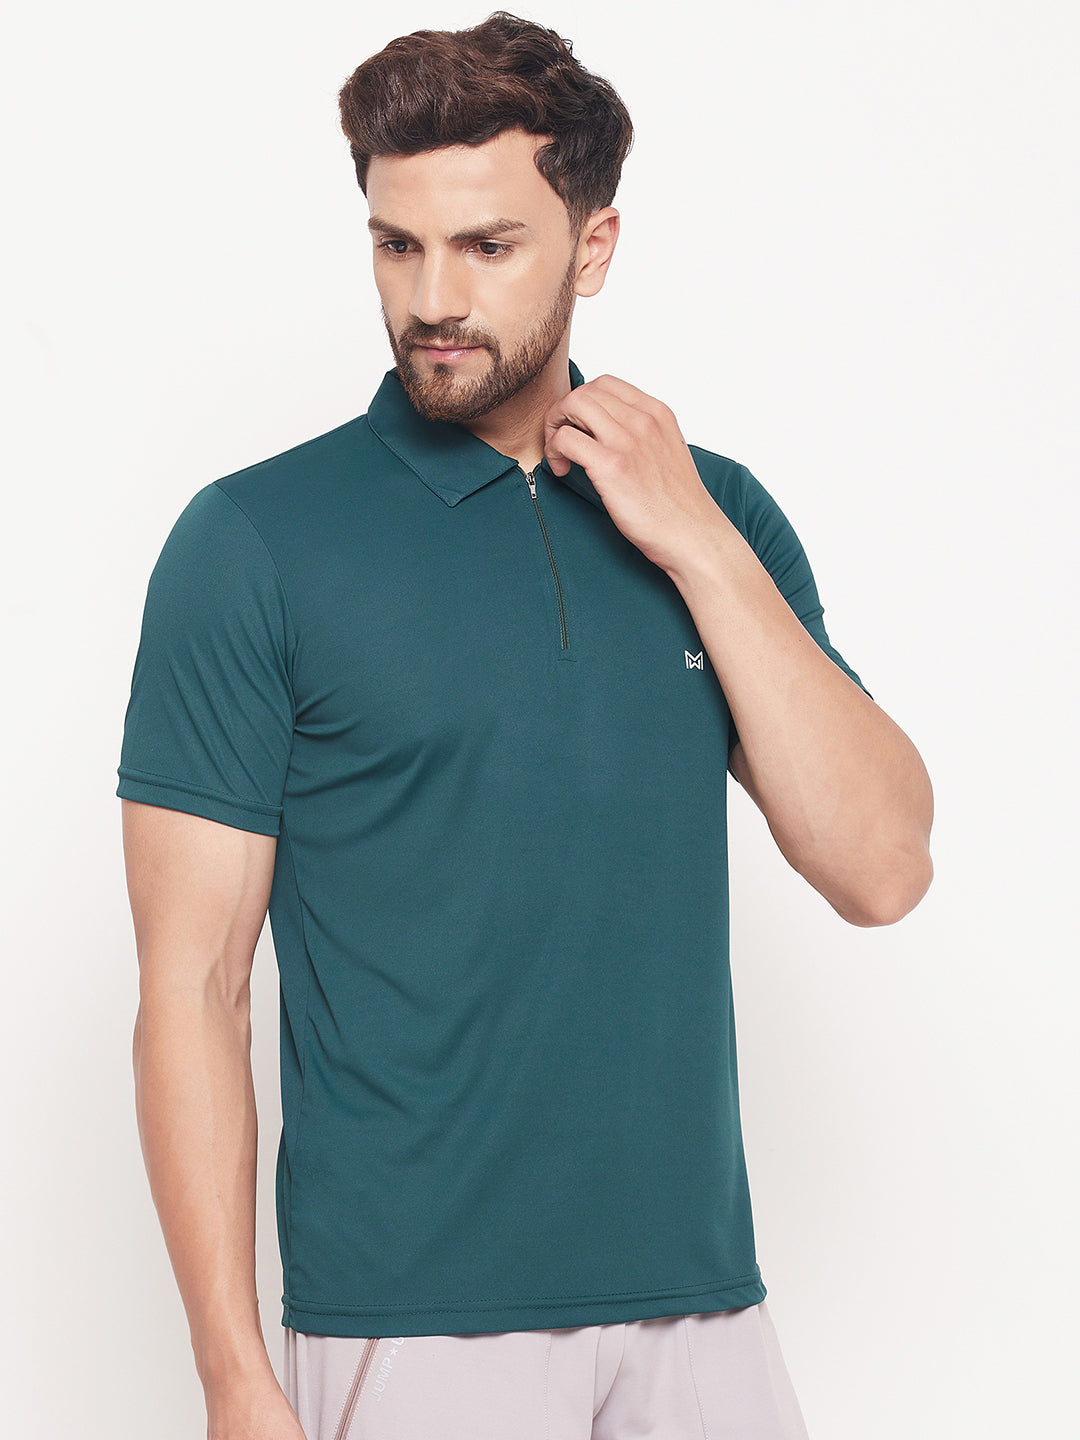 White Moon Dry fit Collar Sports Tshirt for men (Green) whitemoon.in